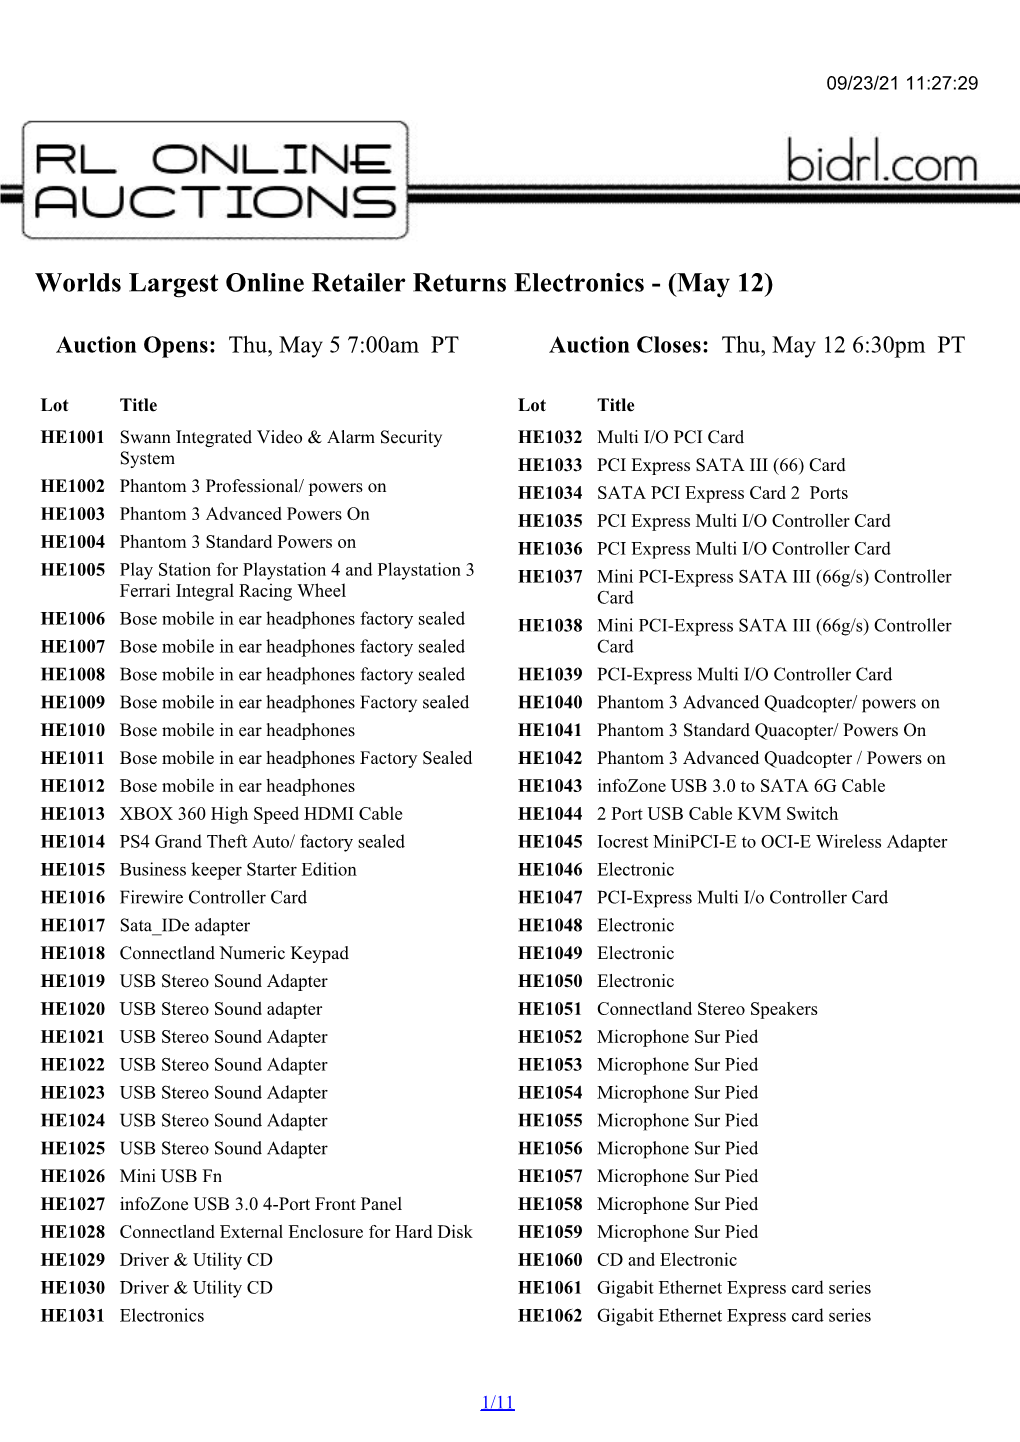 Worlds Largest Online Retailer Returns Electronics - (May 12)